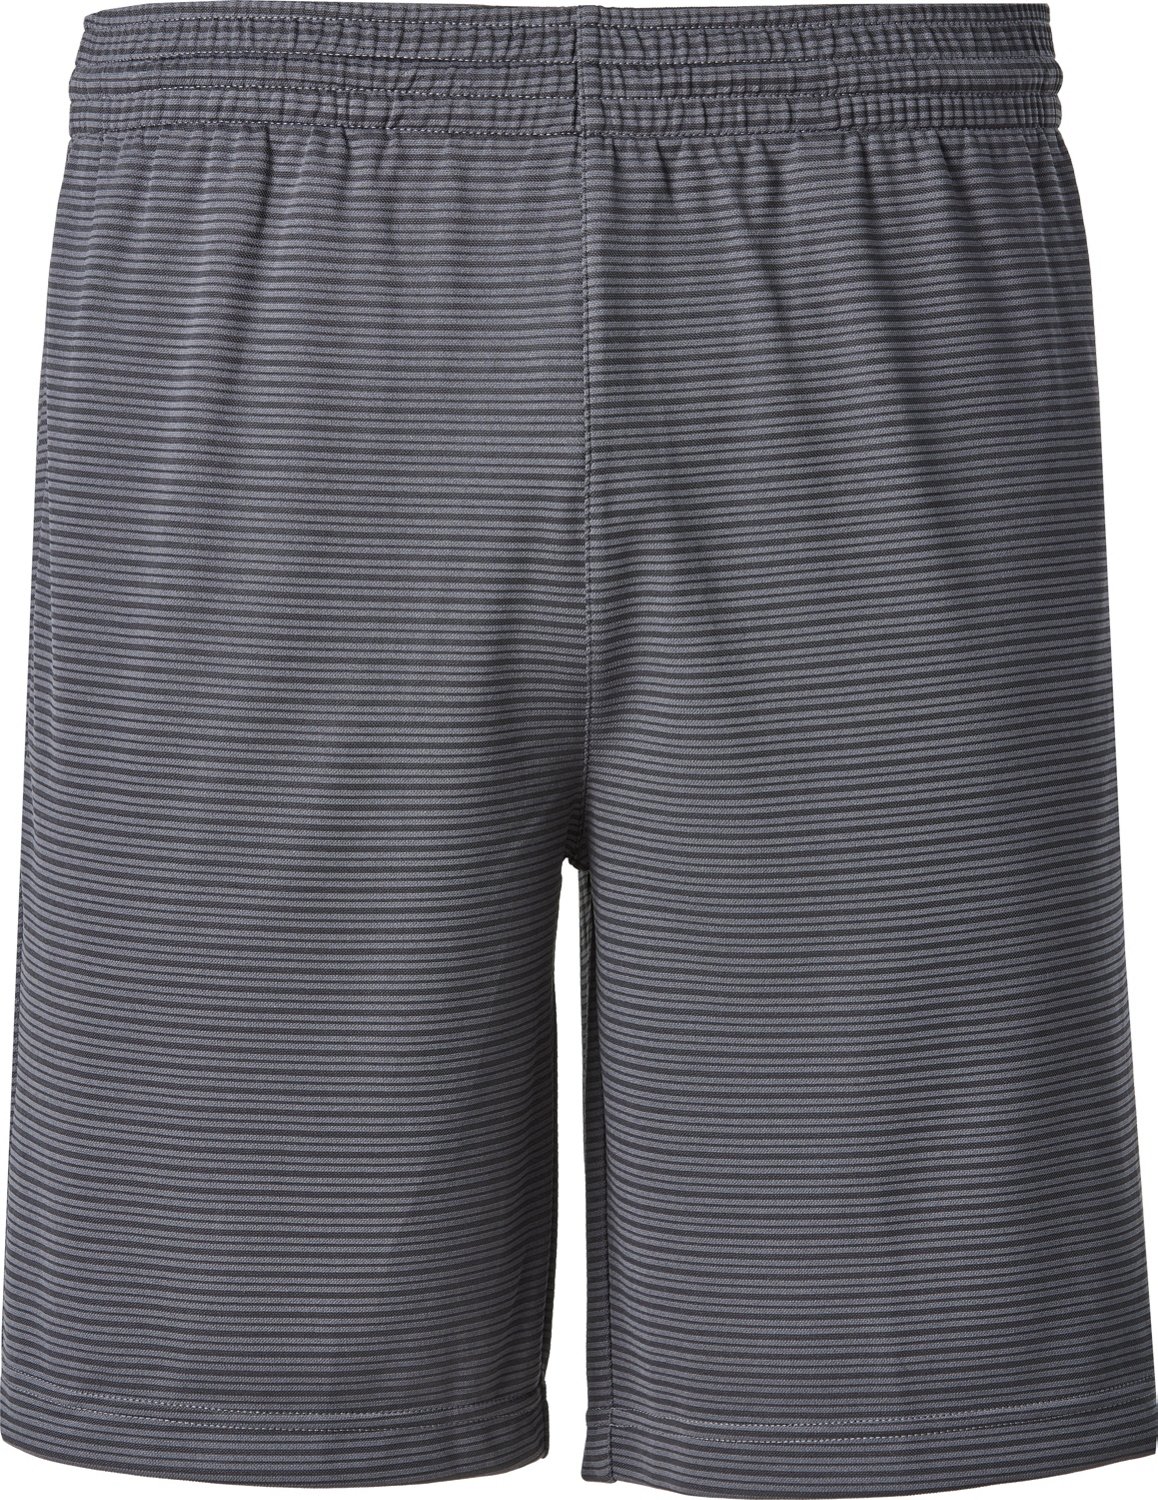 BCG Men's Dazzle Basketball Shorts 9 in                                                                                          - view number 1 selected